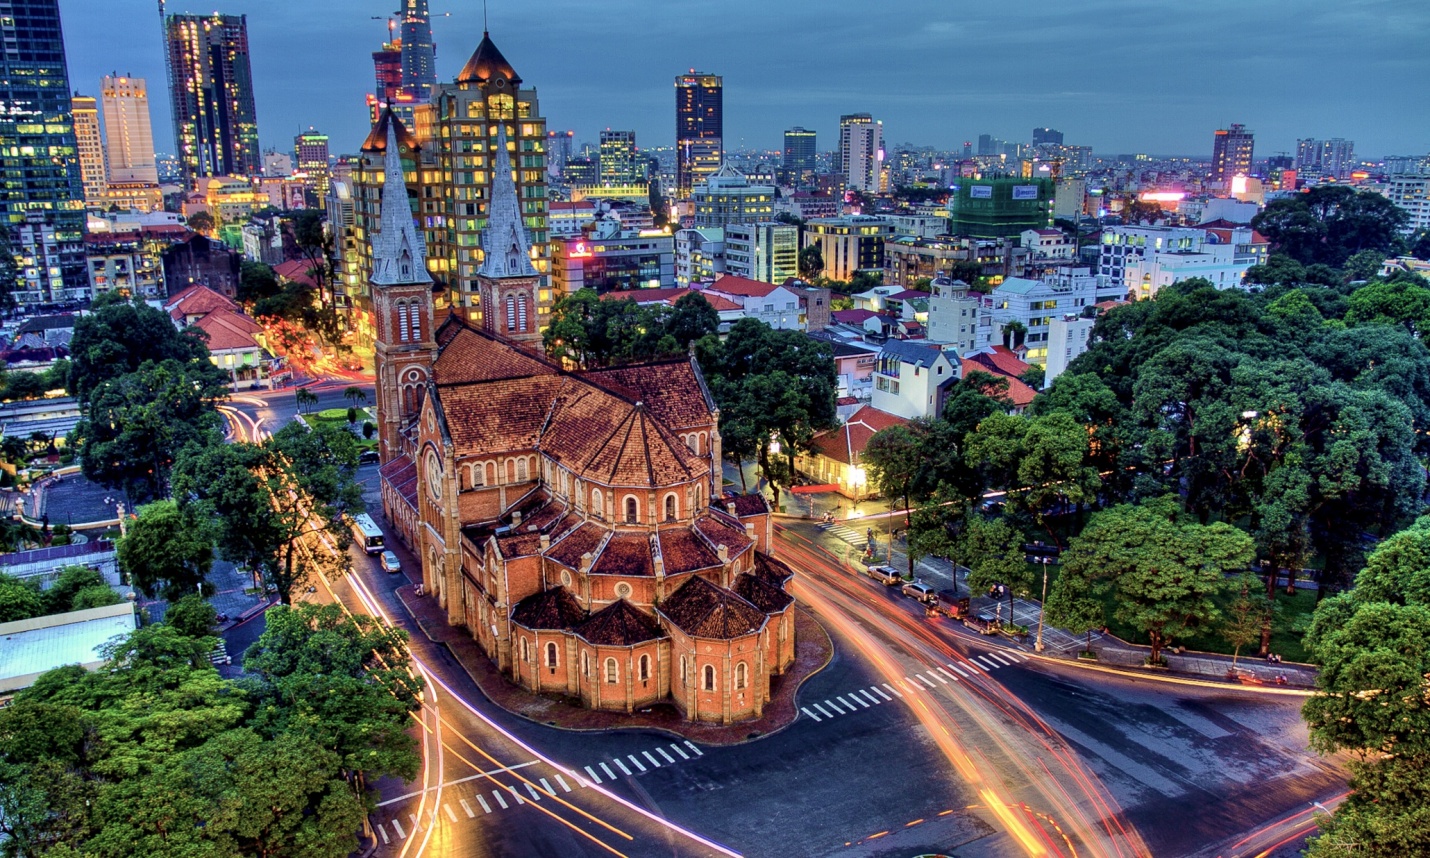 Enjoy the beautiful Saigon with well prepared safety tips